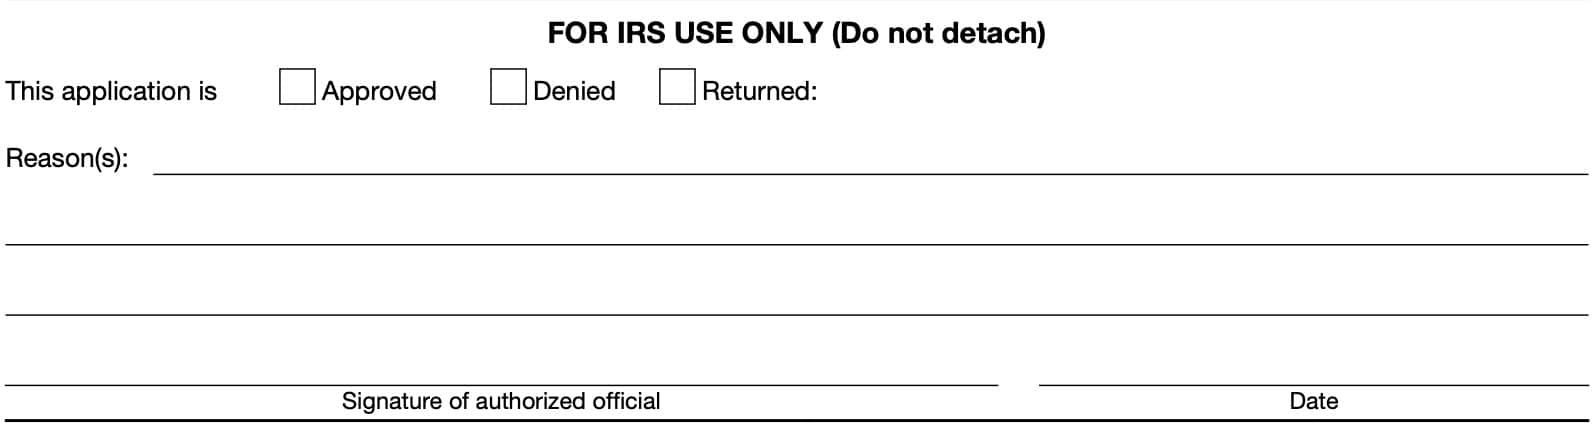 for irs use only